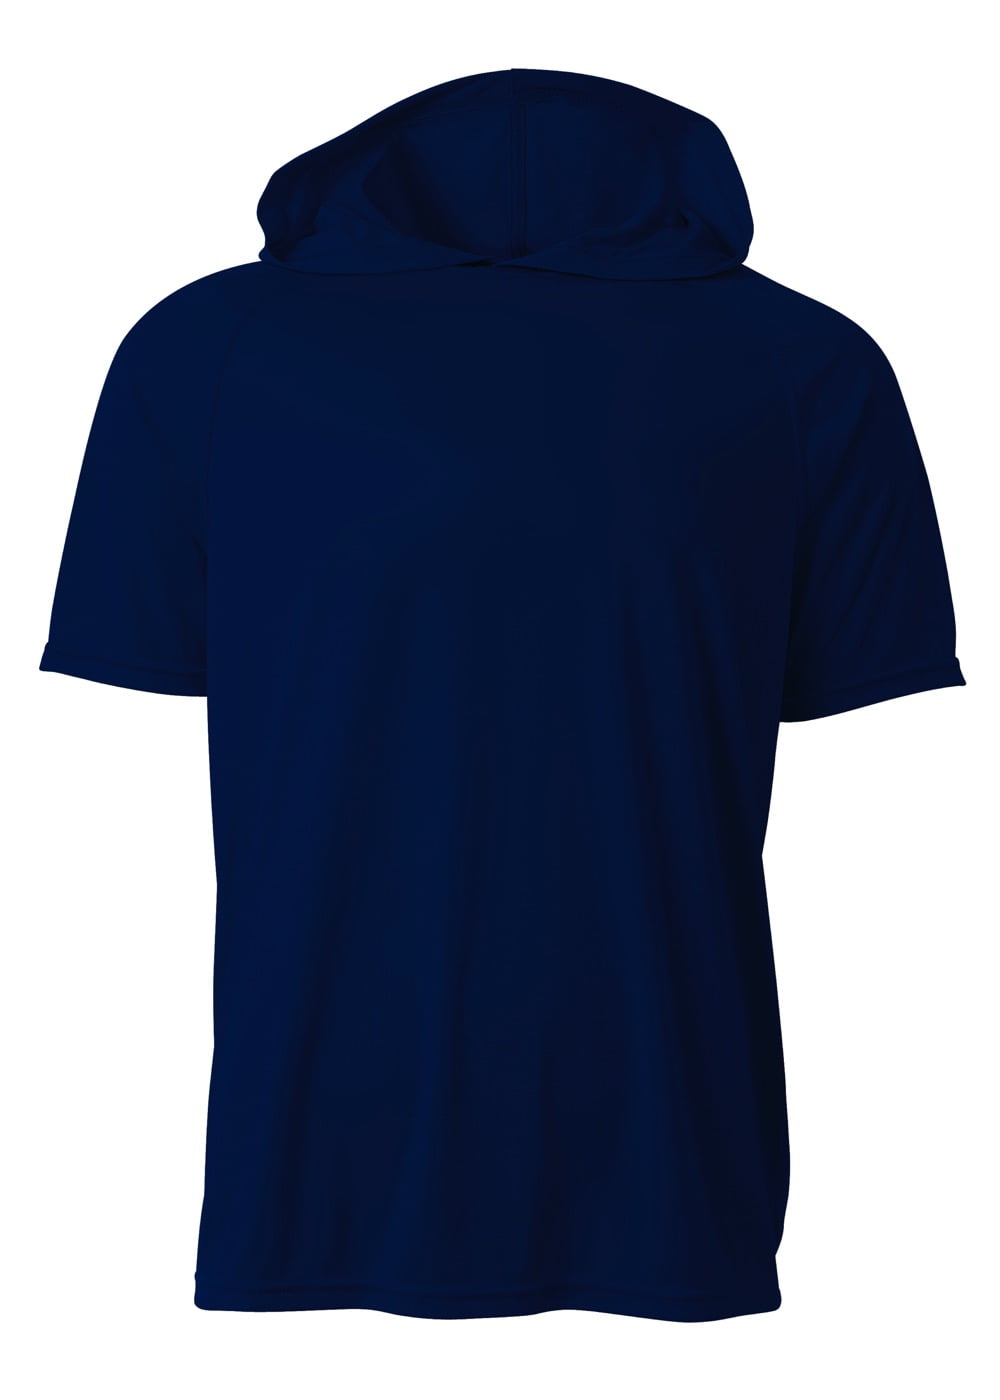 A4 Small Men's Short Sleeve Cooling Performance Navy Blue Hooded Tee ...